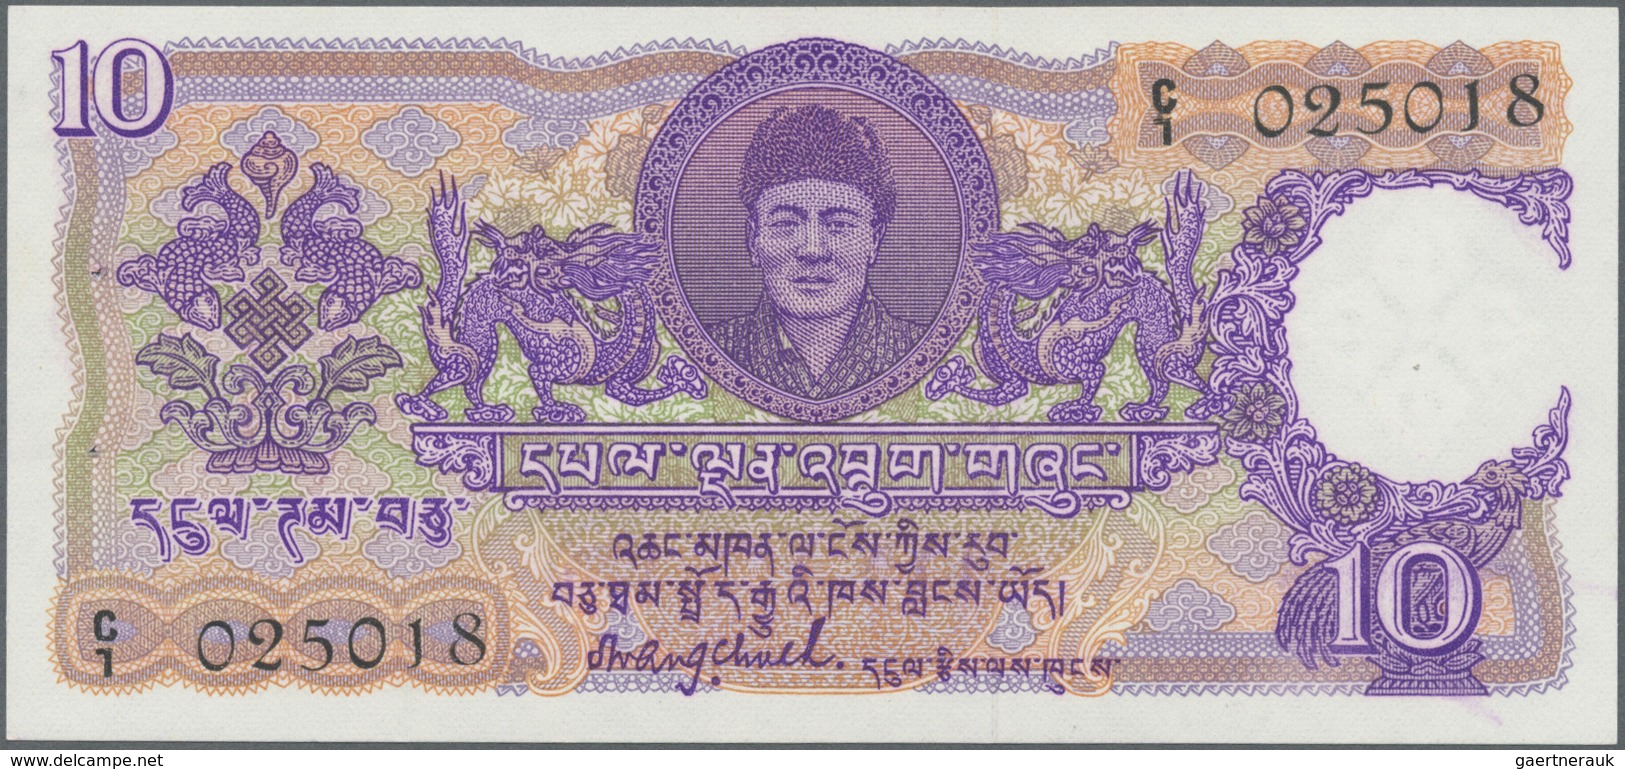 Bhutan: Highly Rare 5 Ngultrum P. 3 Note With Only 2 Usual Pinholes, Otherwise: UNC. - Bhutan